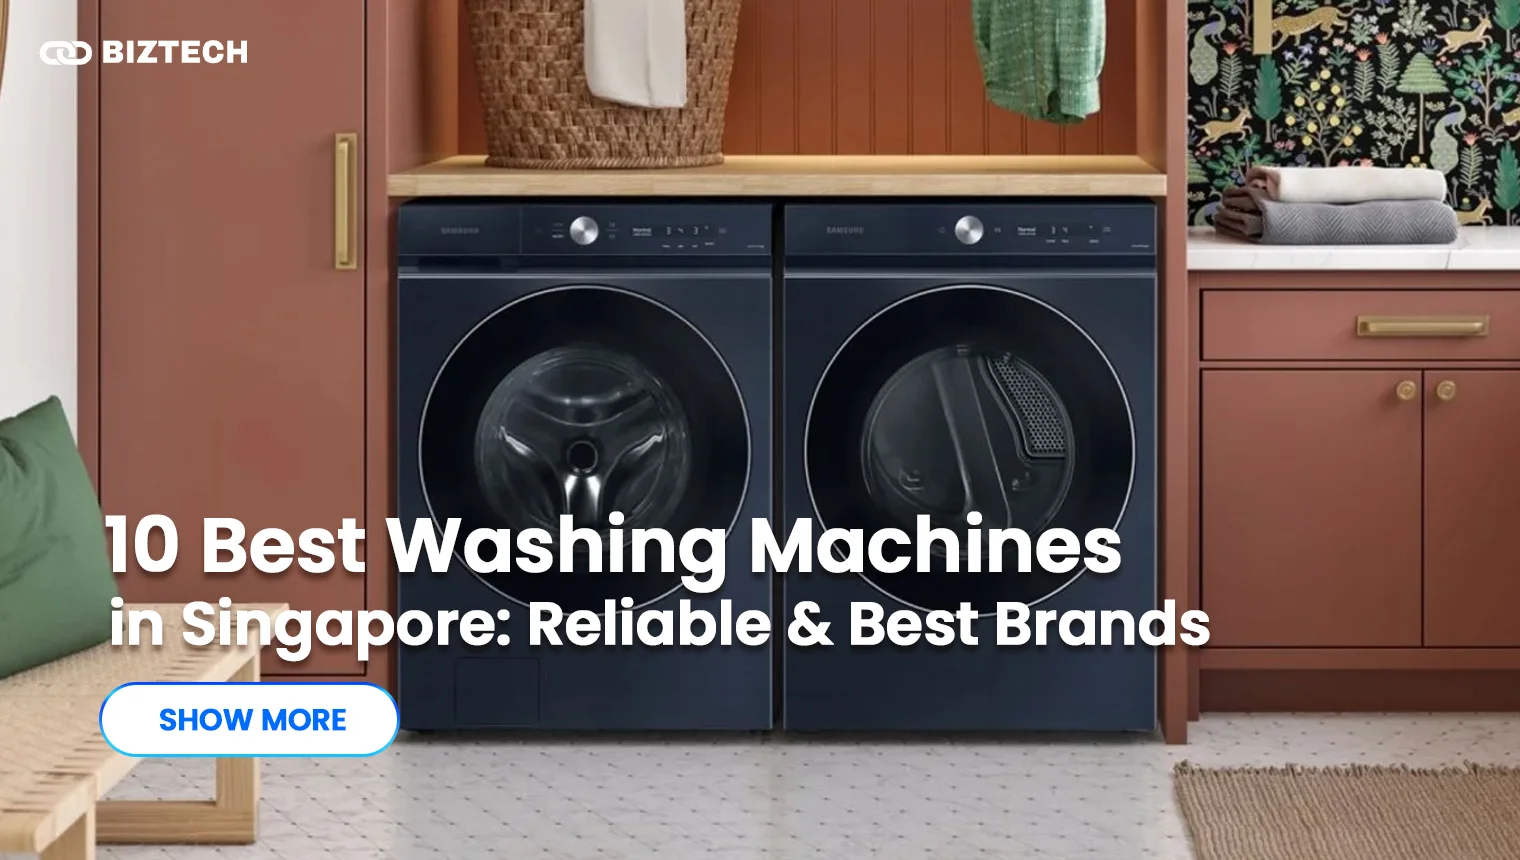 10 Best Washing Machines in Singapore: Reliable & Best Brands